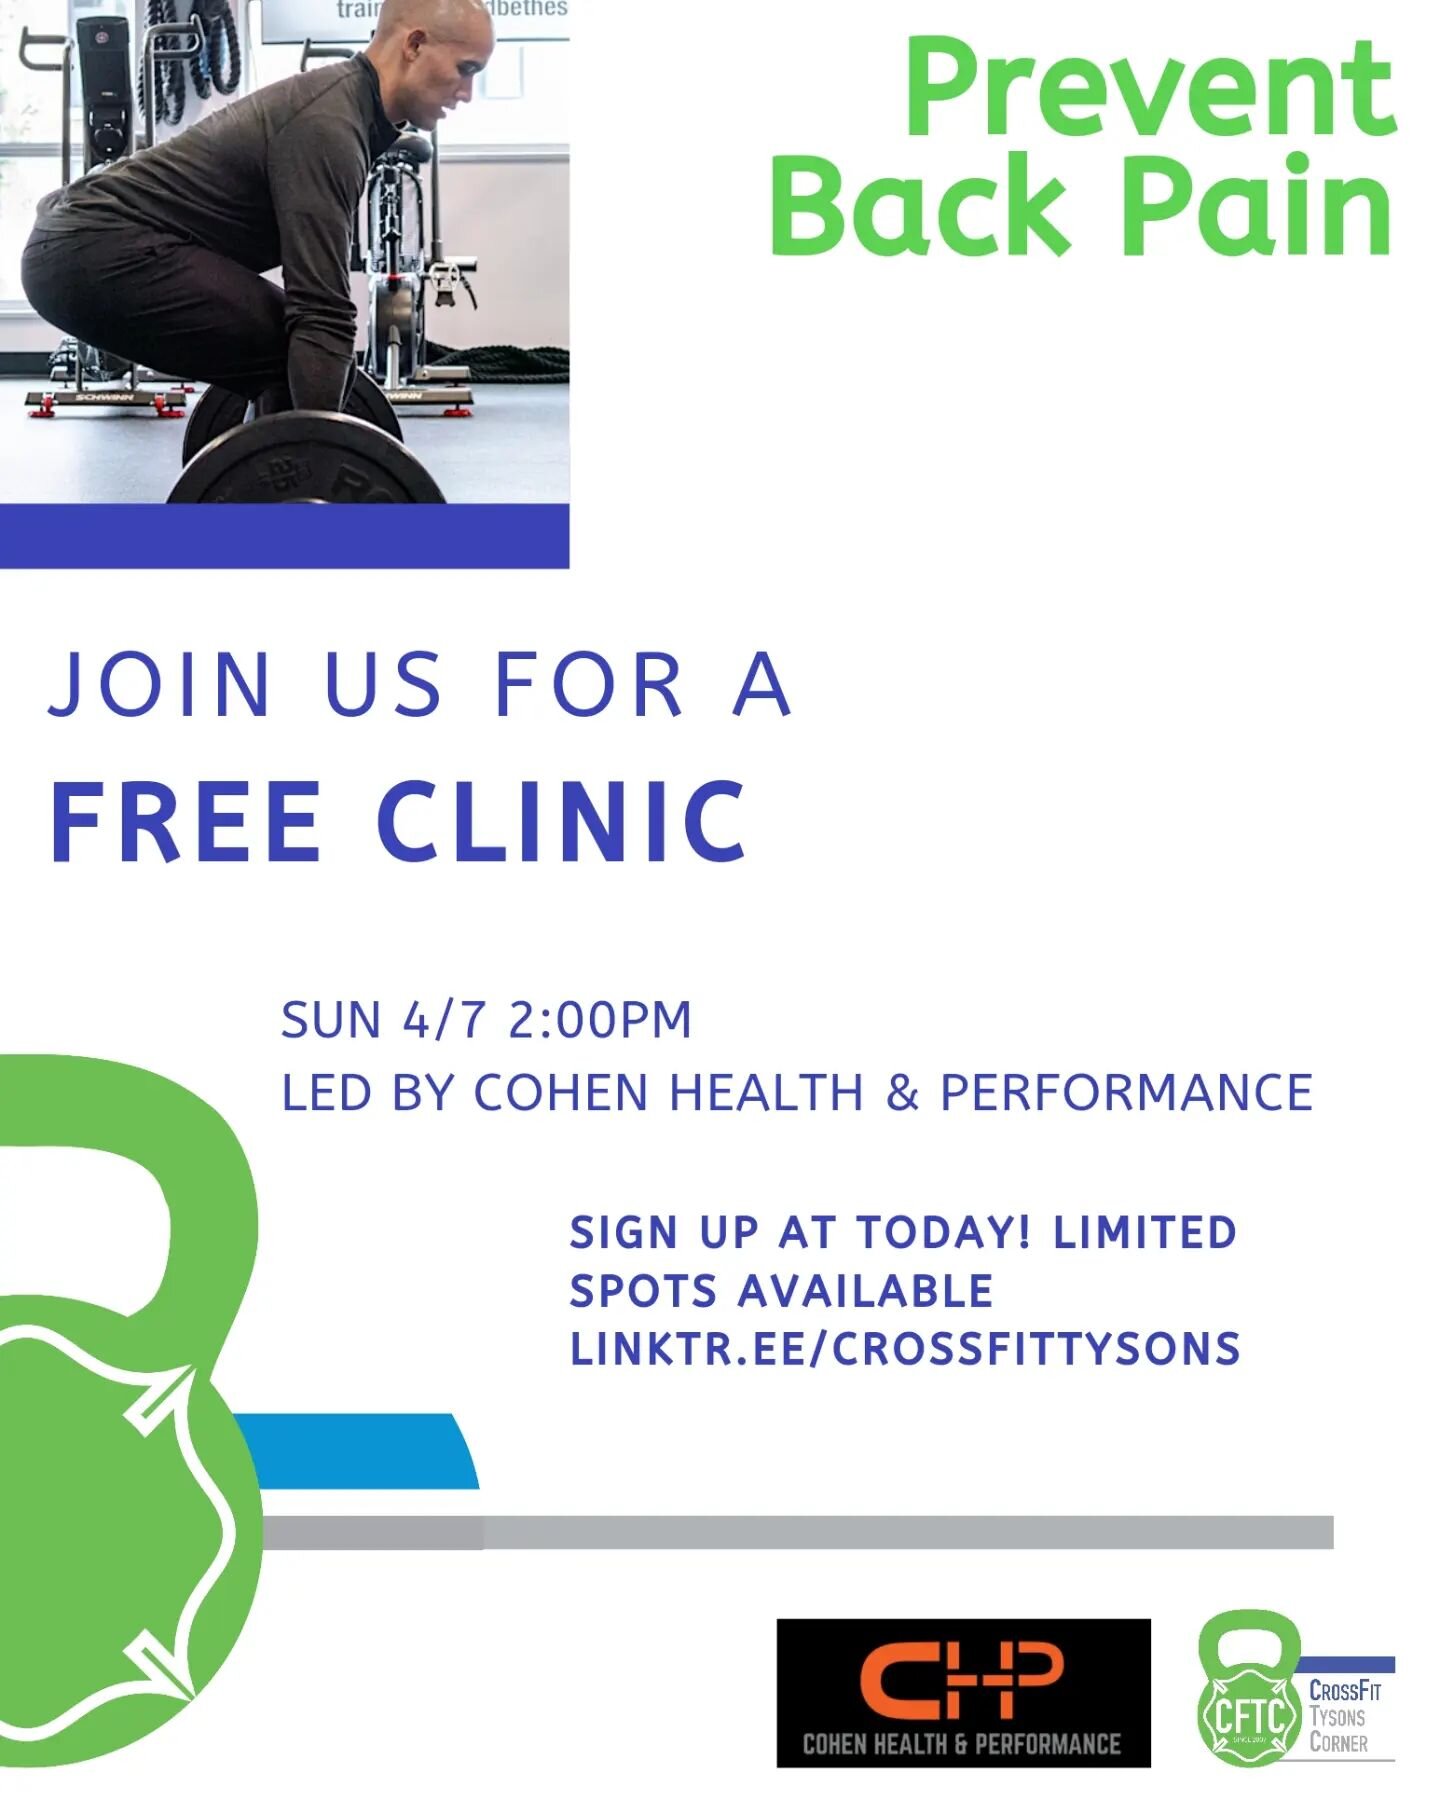 Join Dr. Zachary Cohen for a FREE workshop, sign up at link in profile linktr.ee/crossfittysons entitled:

&ldquo;Keep Training from Being a Pain in the Back.&rdquo;

Sunday, April 7th at 2pm
Crossfit Tysons Corner
8453 Tyco Rd. Suite k
Vienna, VA 22